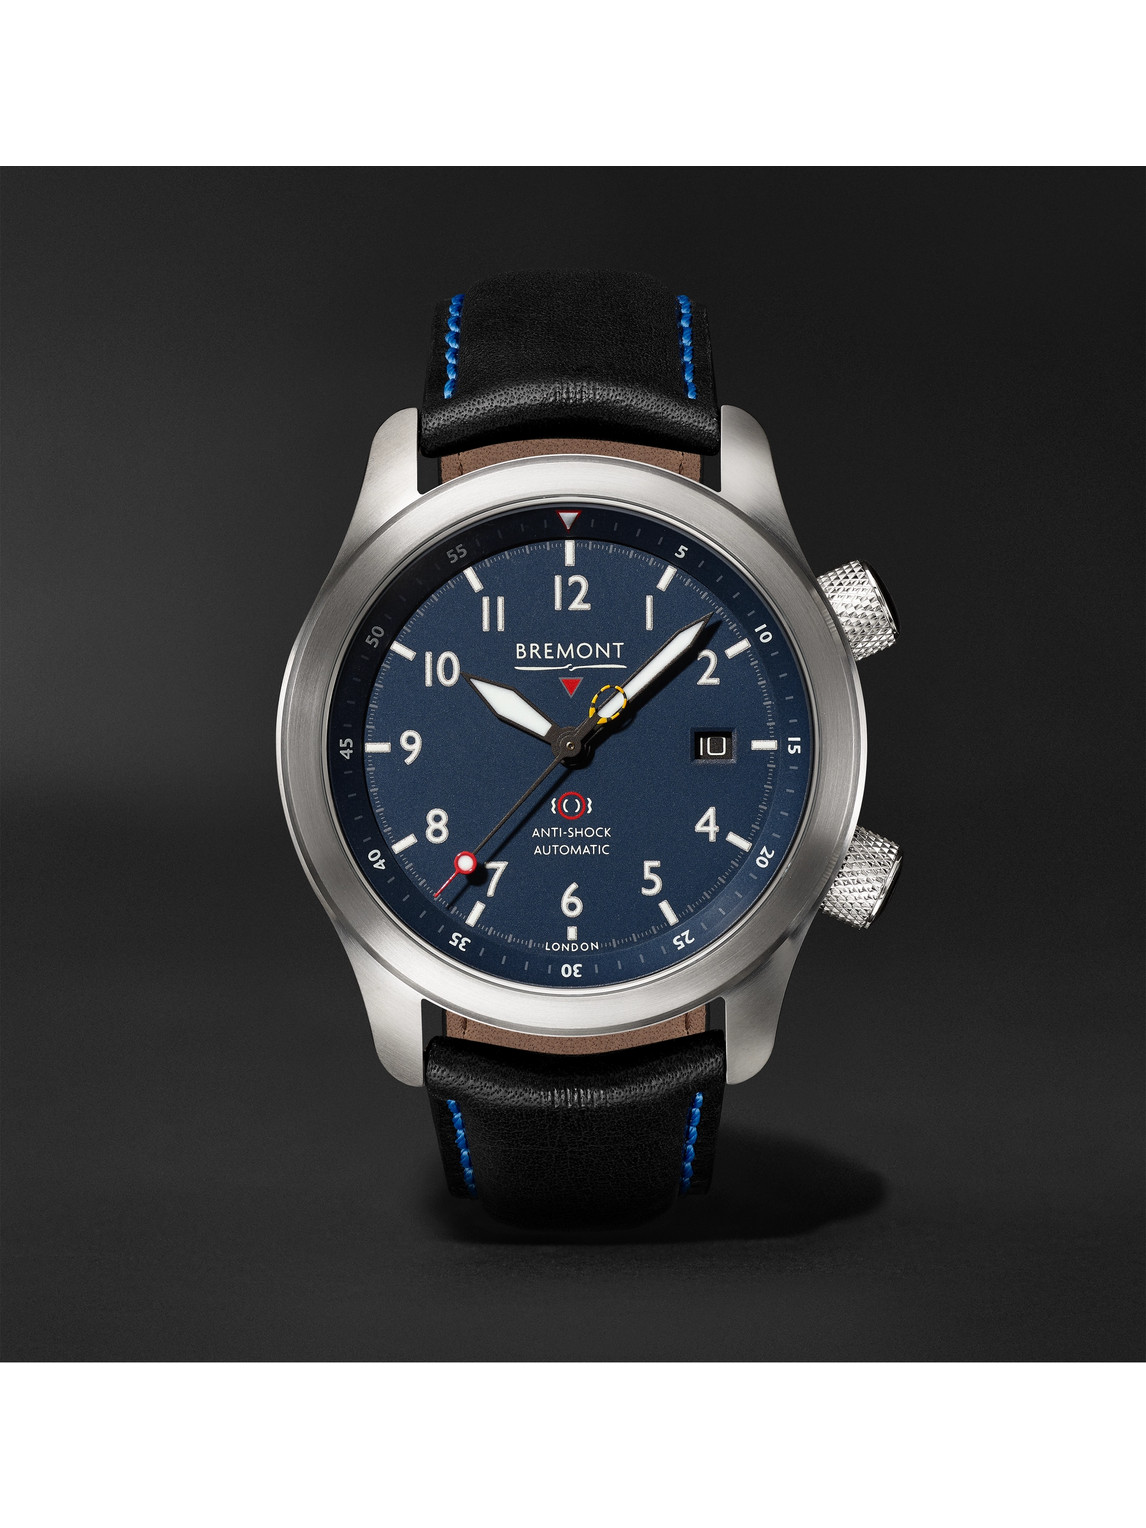 MBII Blue Automatic 43mm Stainless Steel and Leather Watch, Ref. MBII-SS-BL-C-B-P-13R